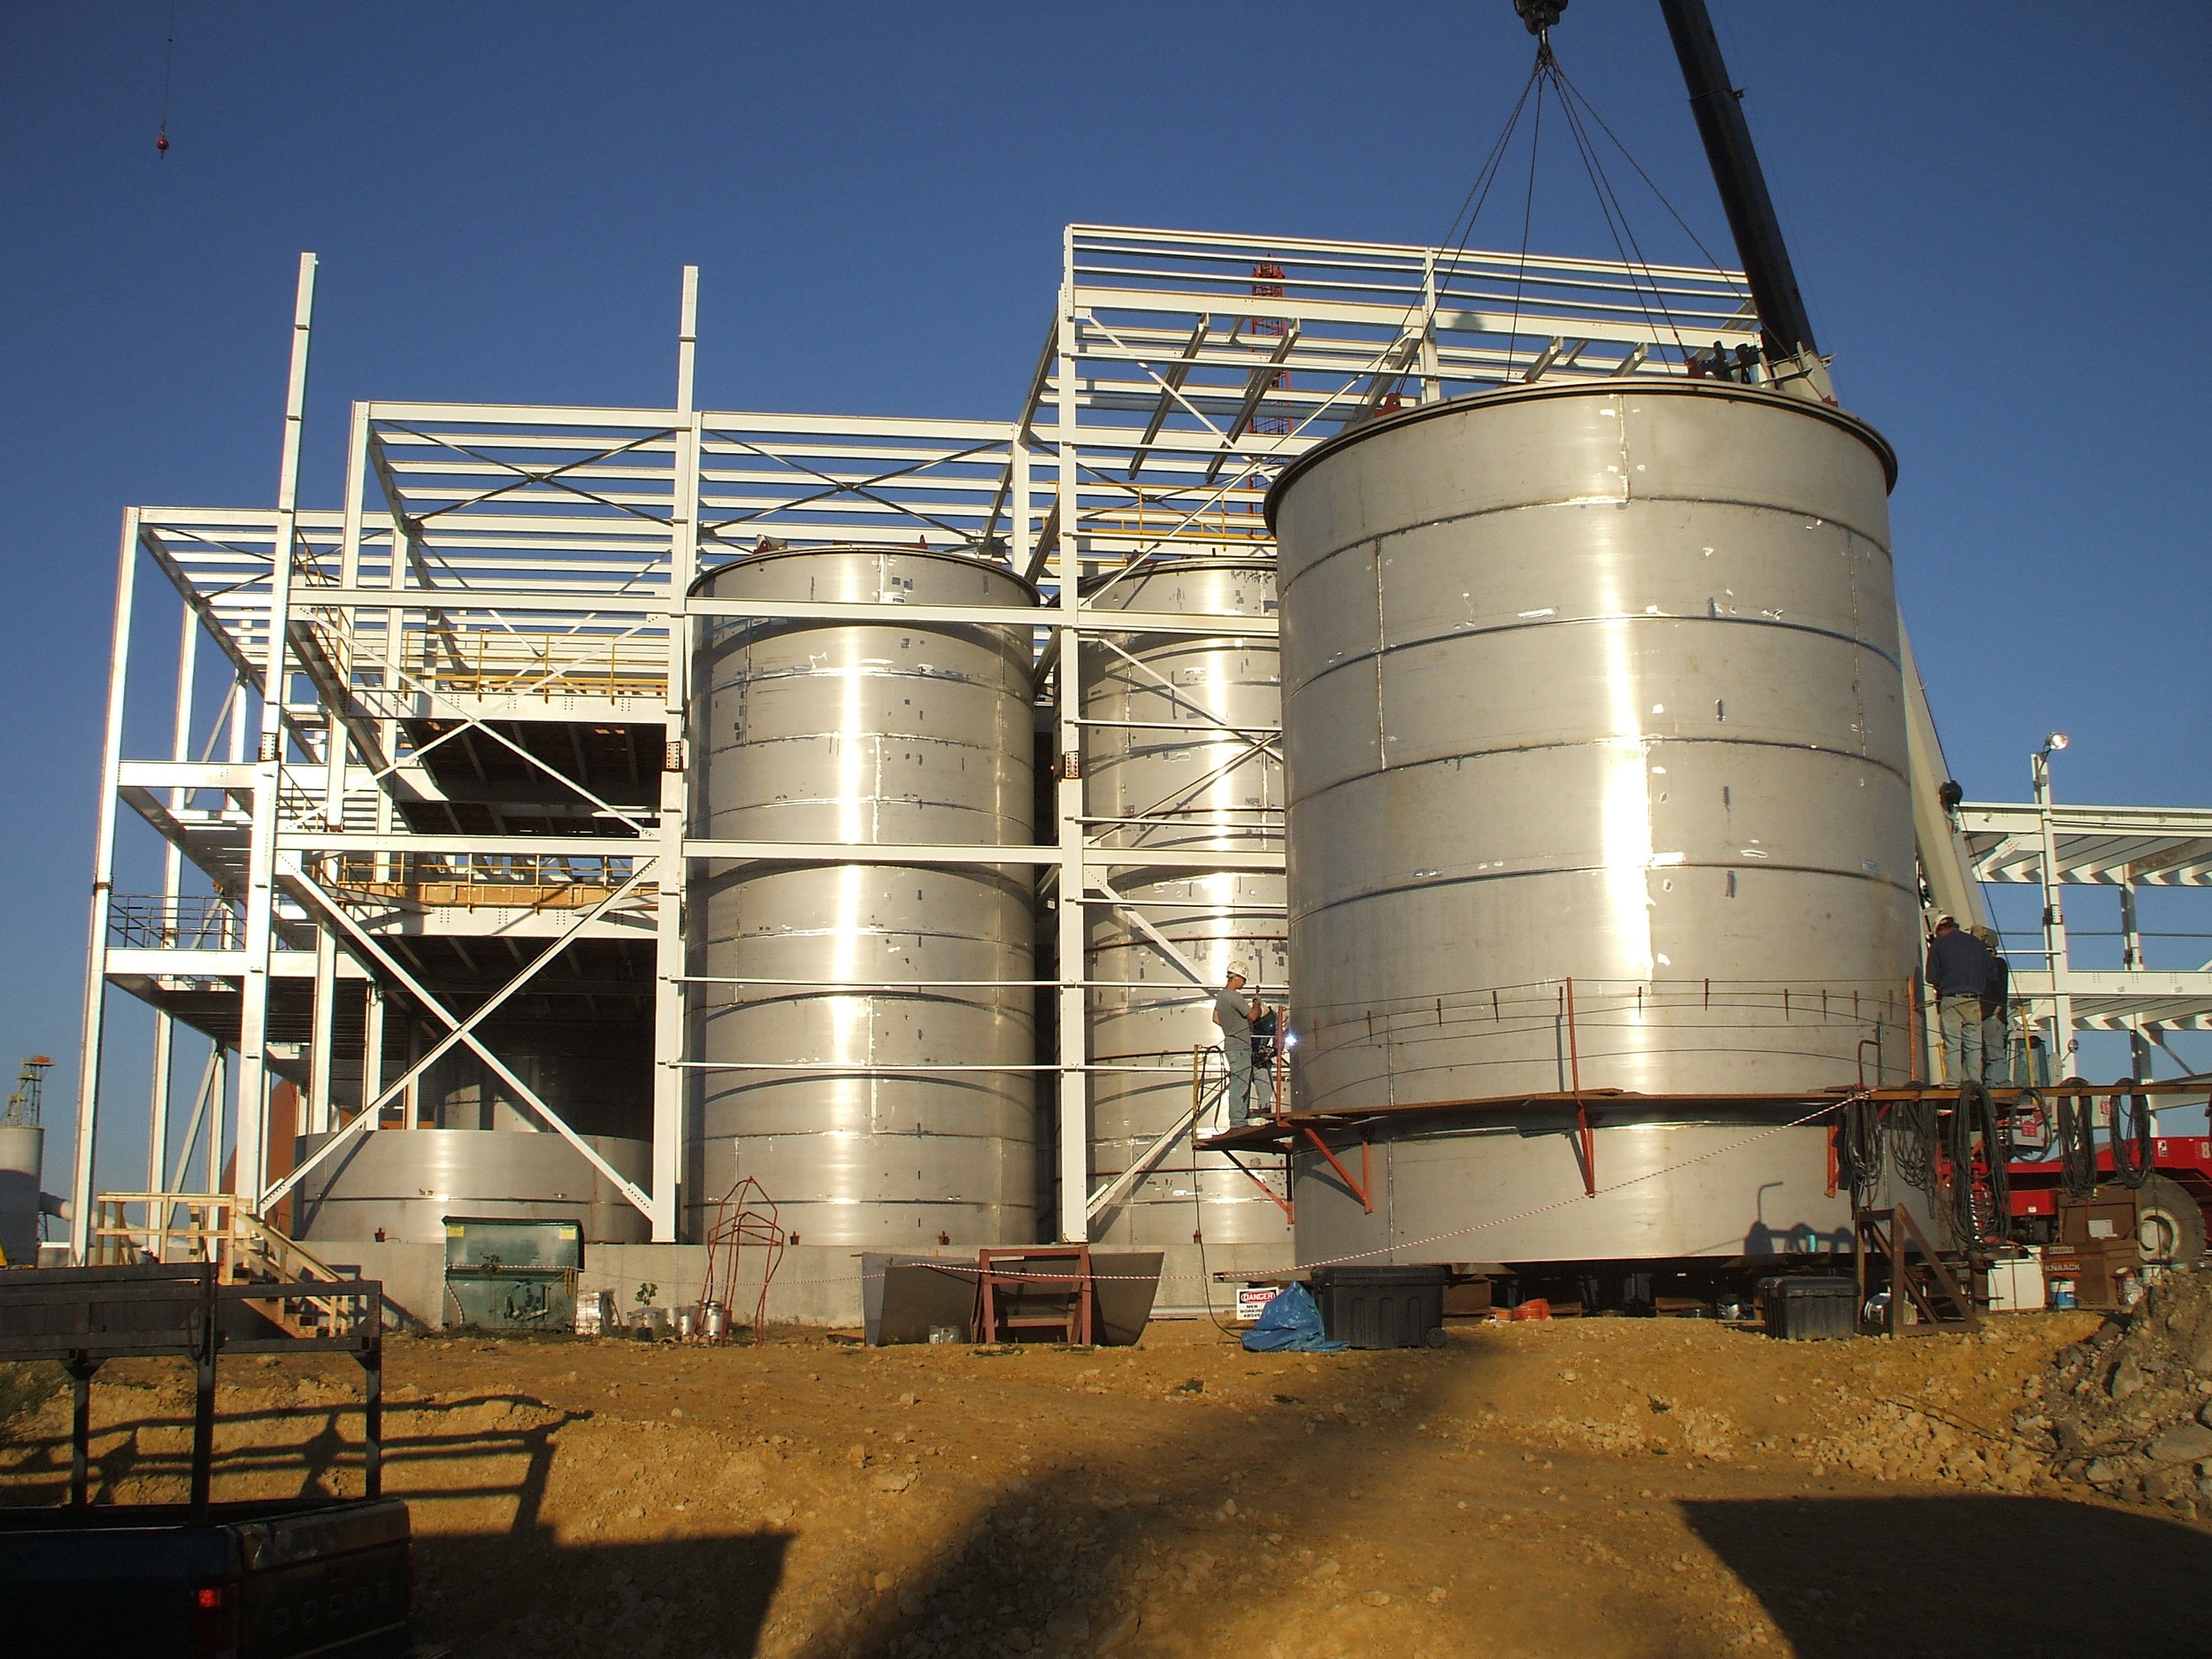 Duplex Stainless Steel Process Tank Project